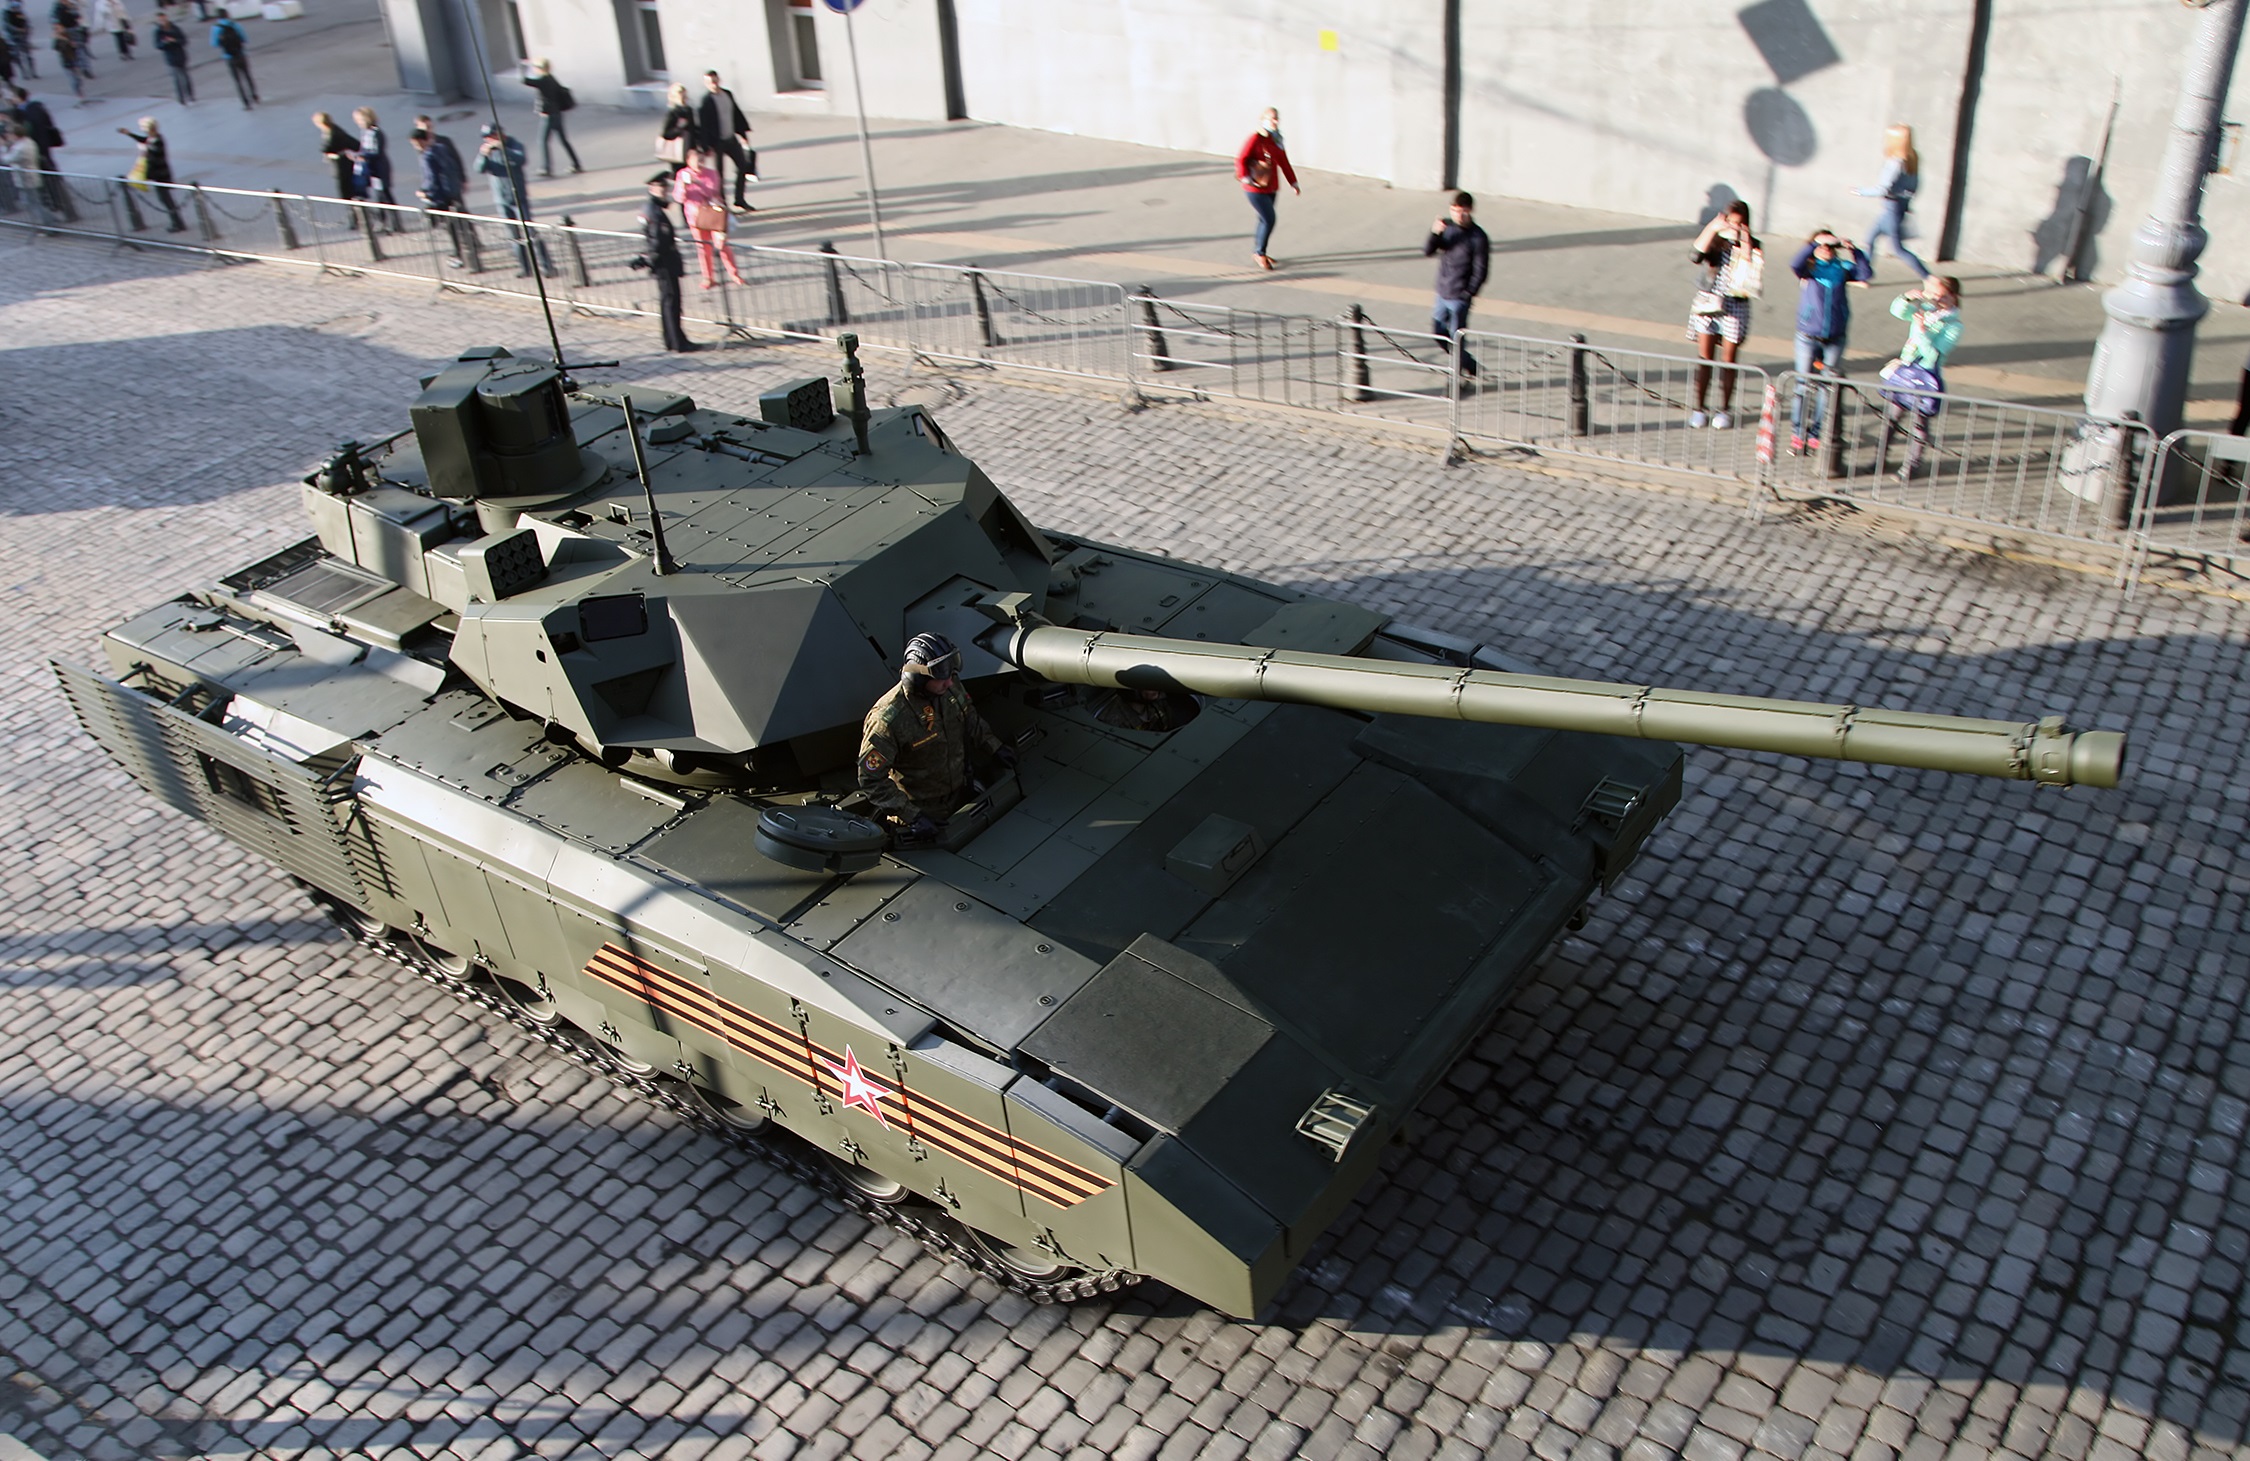 what is the russian main battle tank